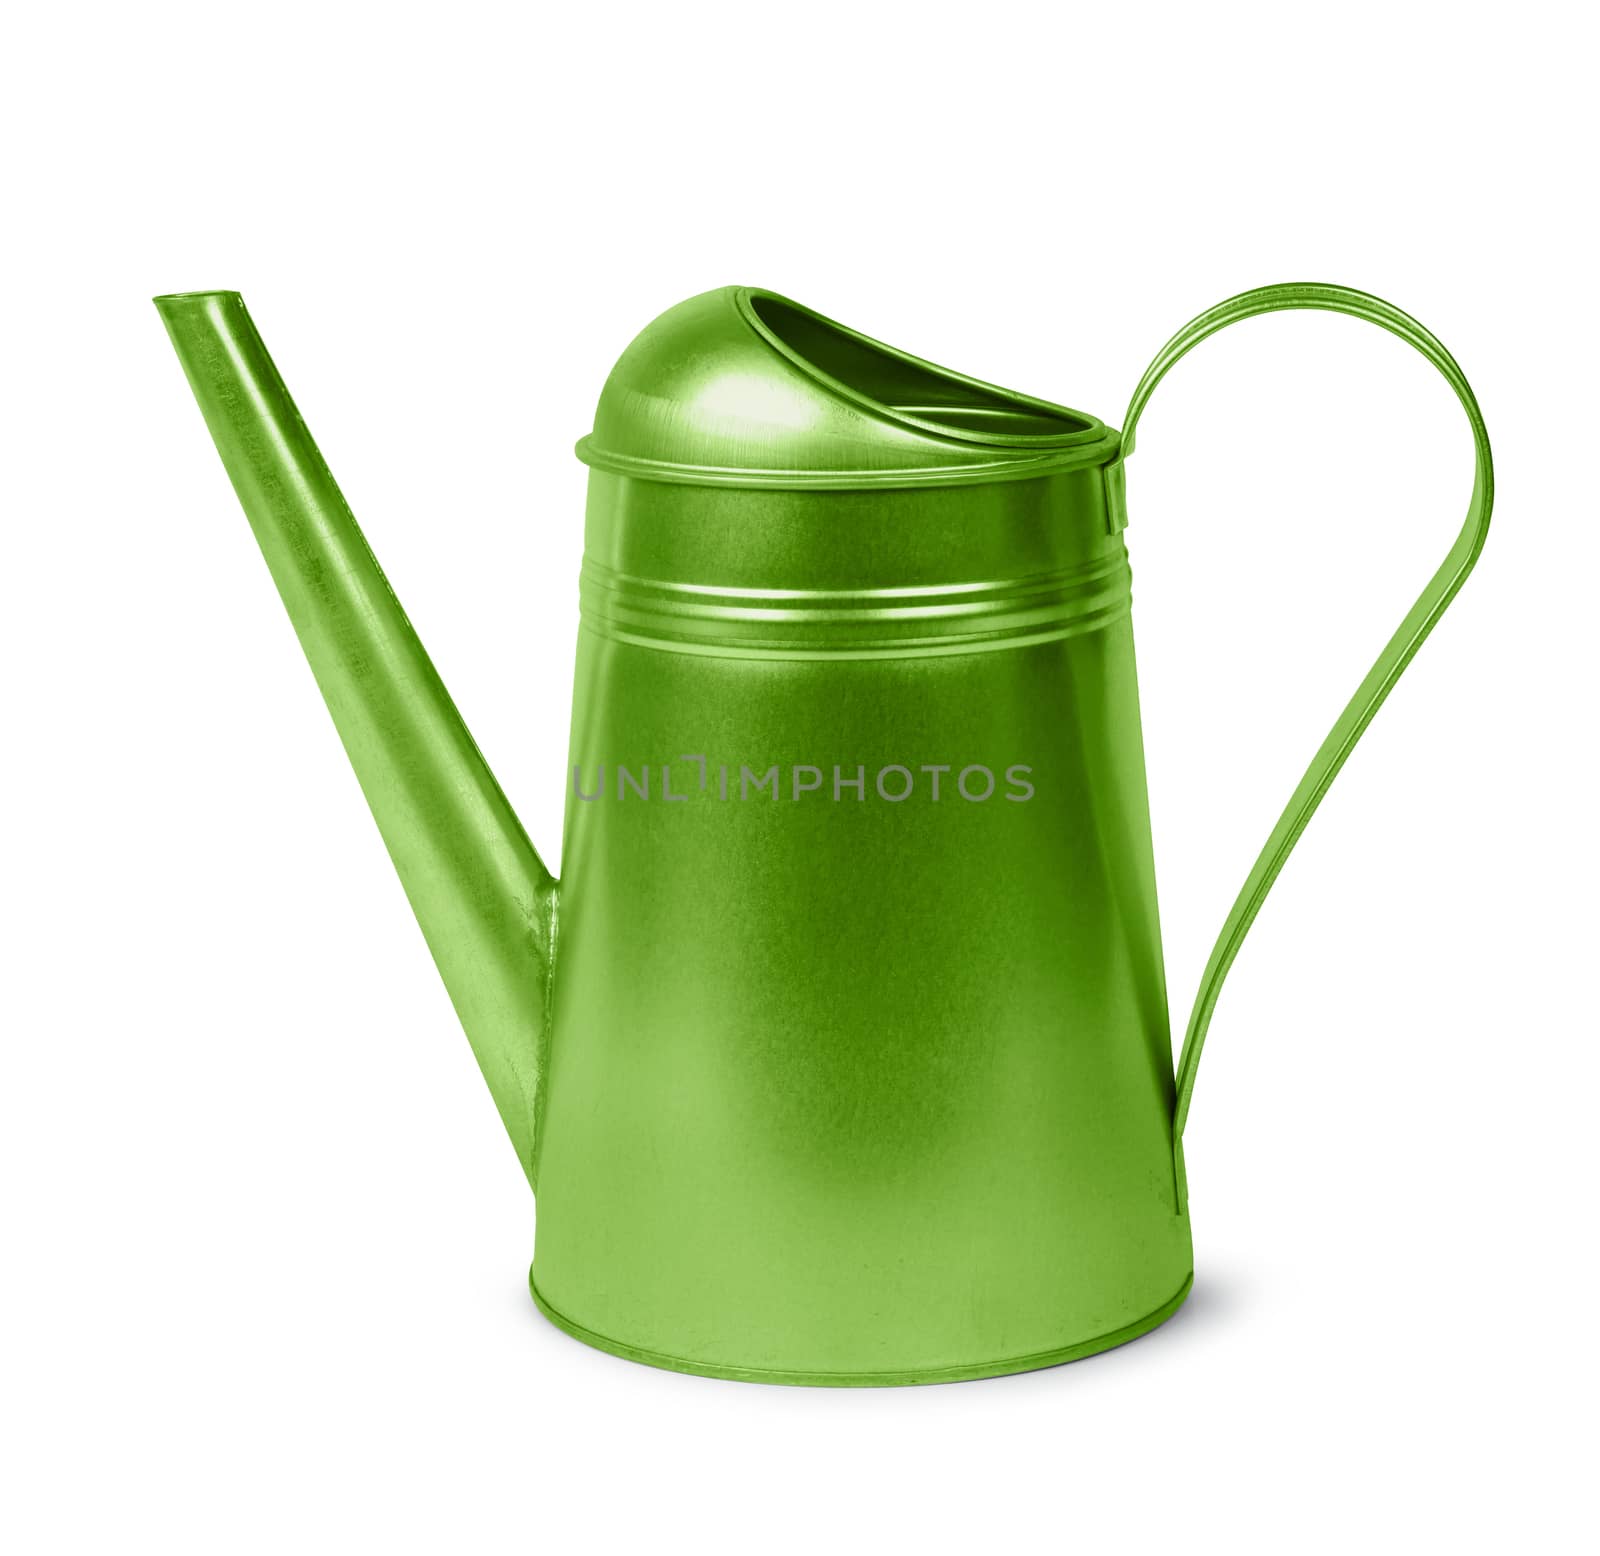 Green watering can by anterovium